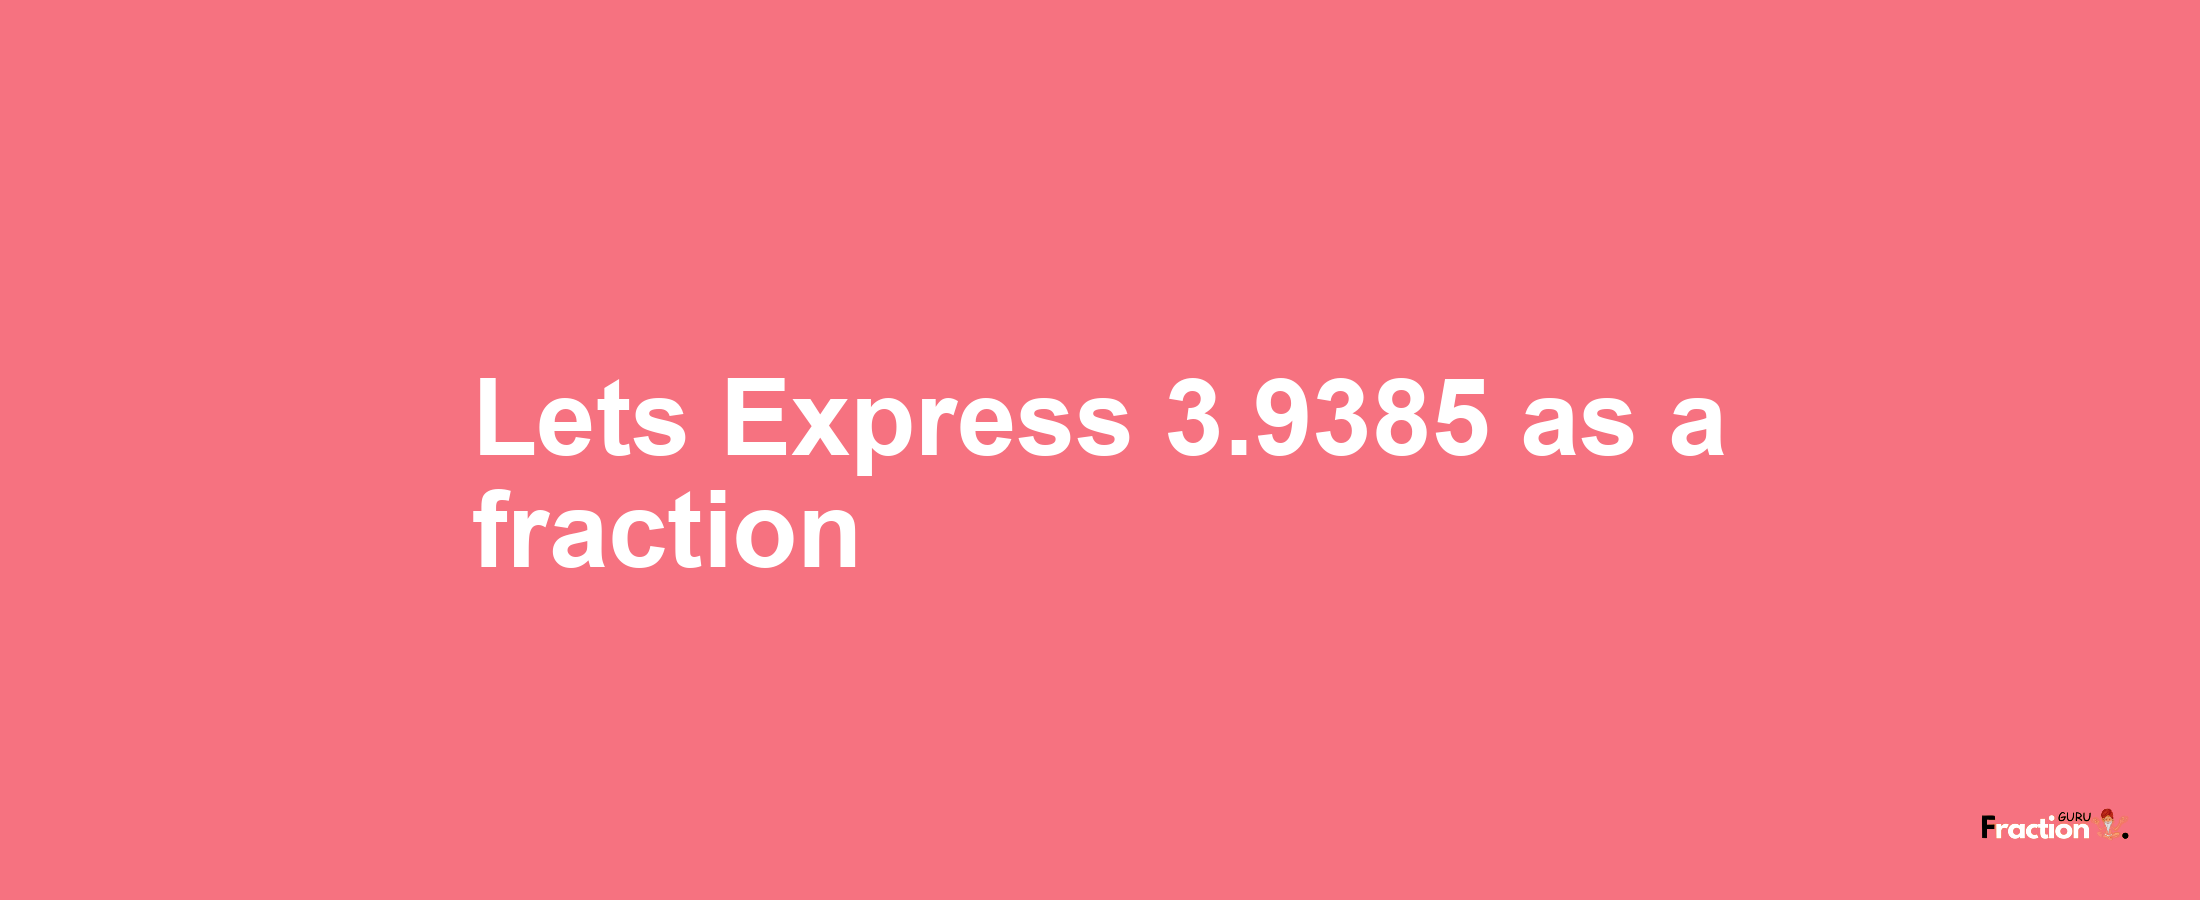 Lets Express 3.9385 as afraction